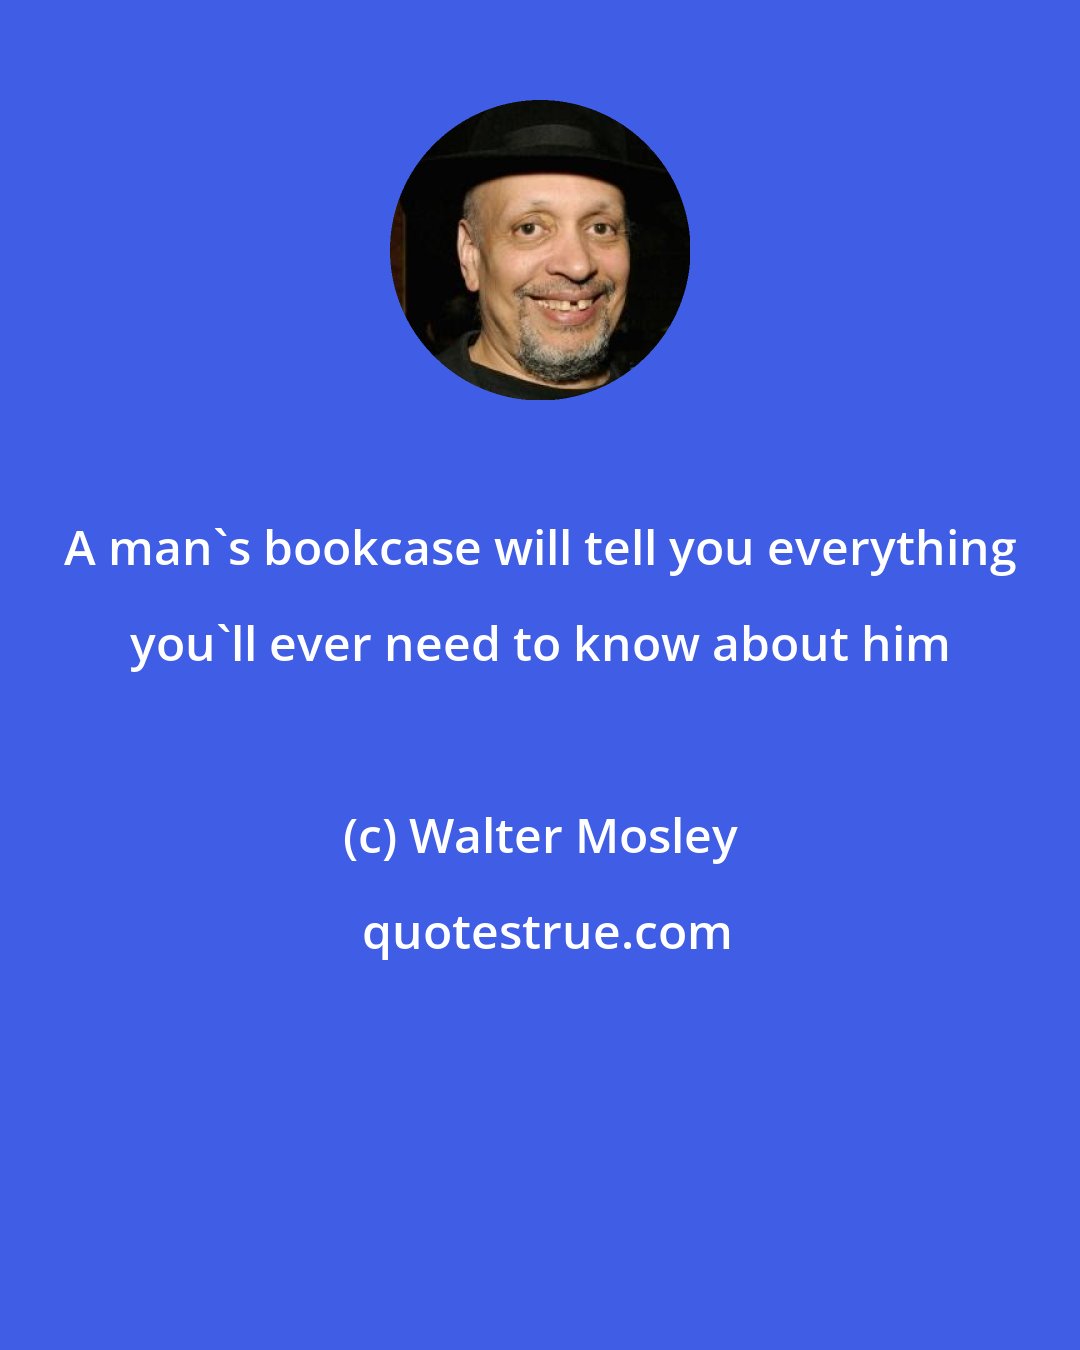 Walter Mosley: A man's bookcase will tell you everything you'll ever need to know about him